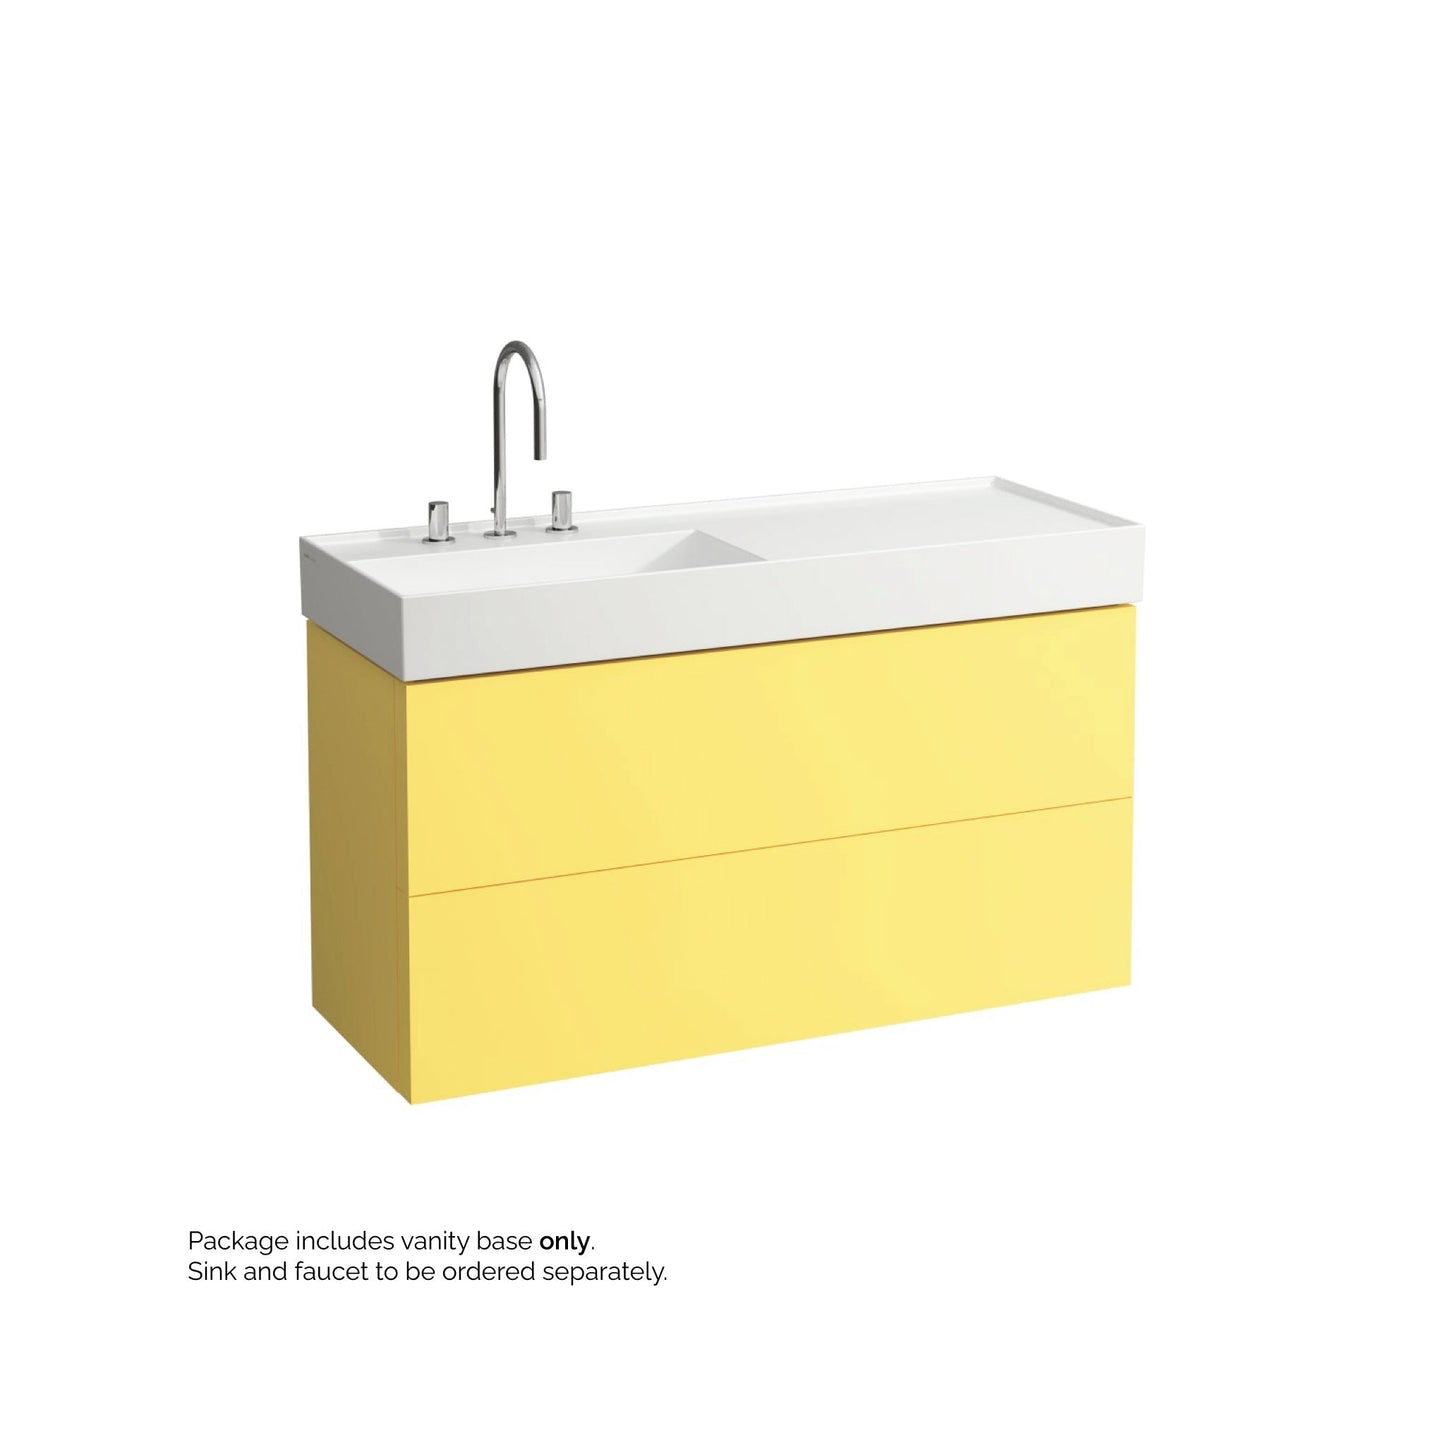 Laufen Kartell 47" 2-Drawer Mustard Yellow Wall-Mounted Vanity With Drawer Organizer for Kartell Bathroom Sink Model: H813332